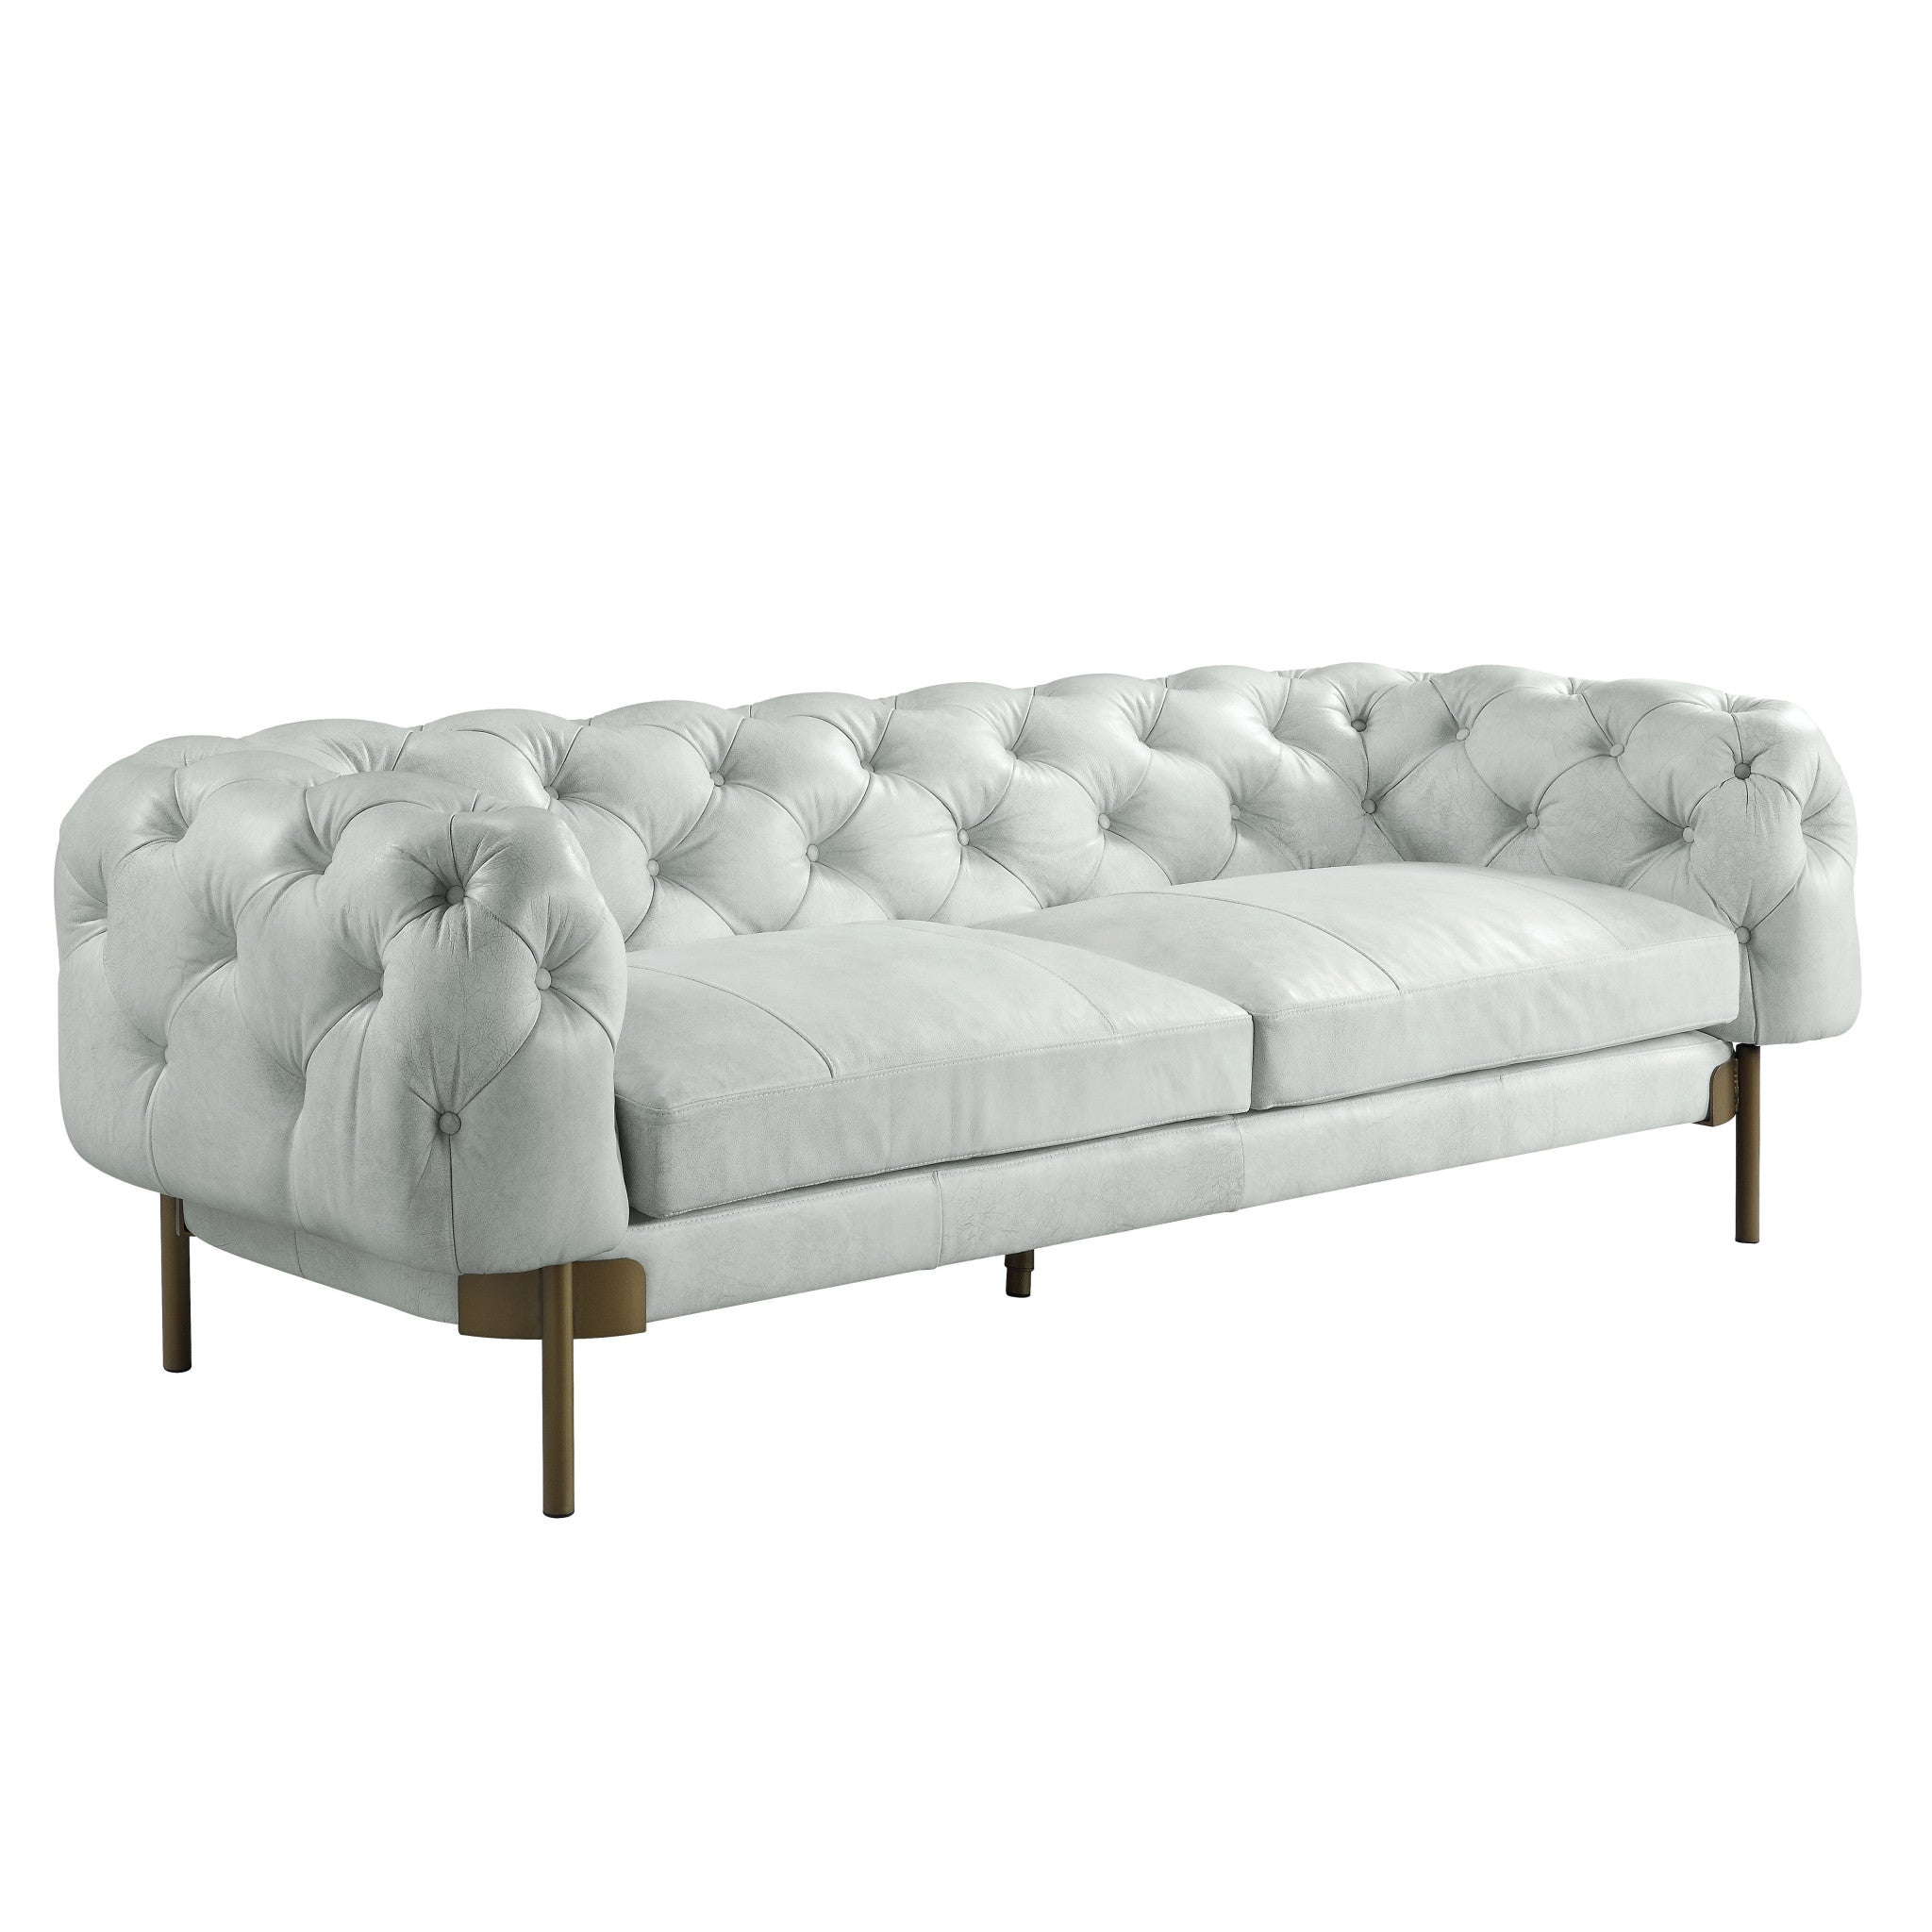 96" Vintage White Top Grain Leather And Gold Sofa